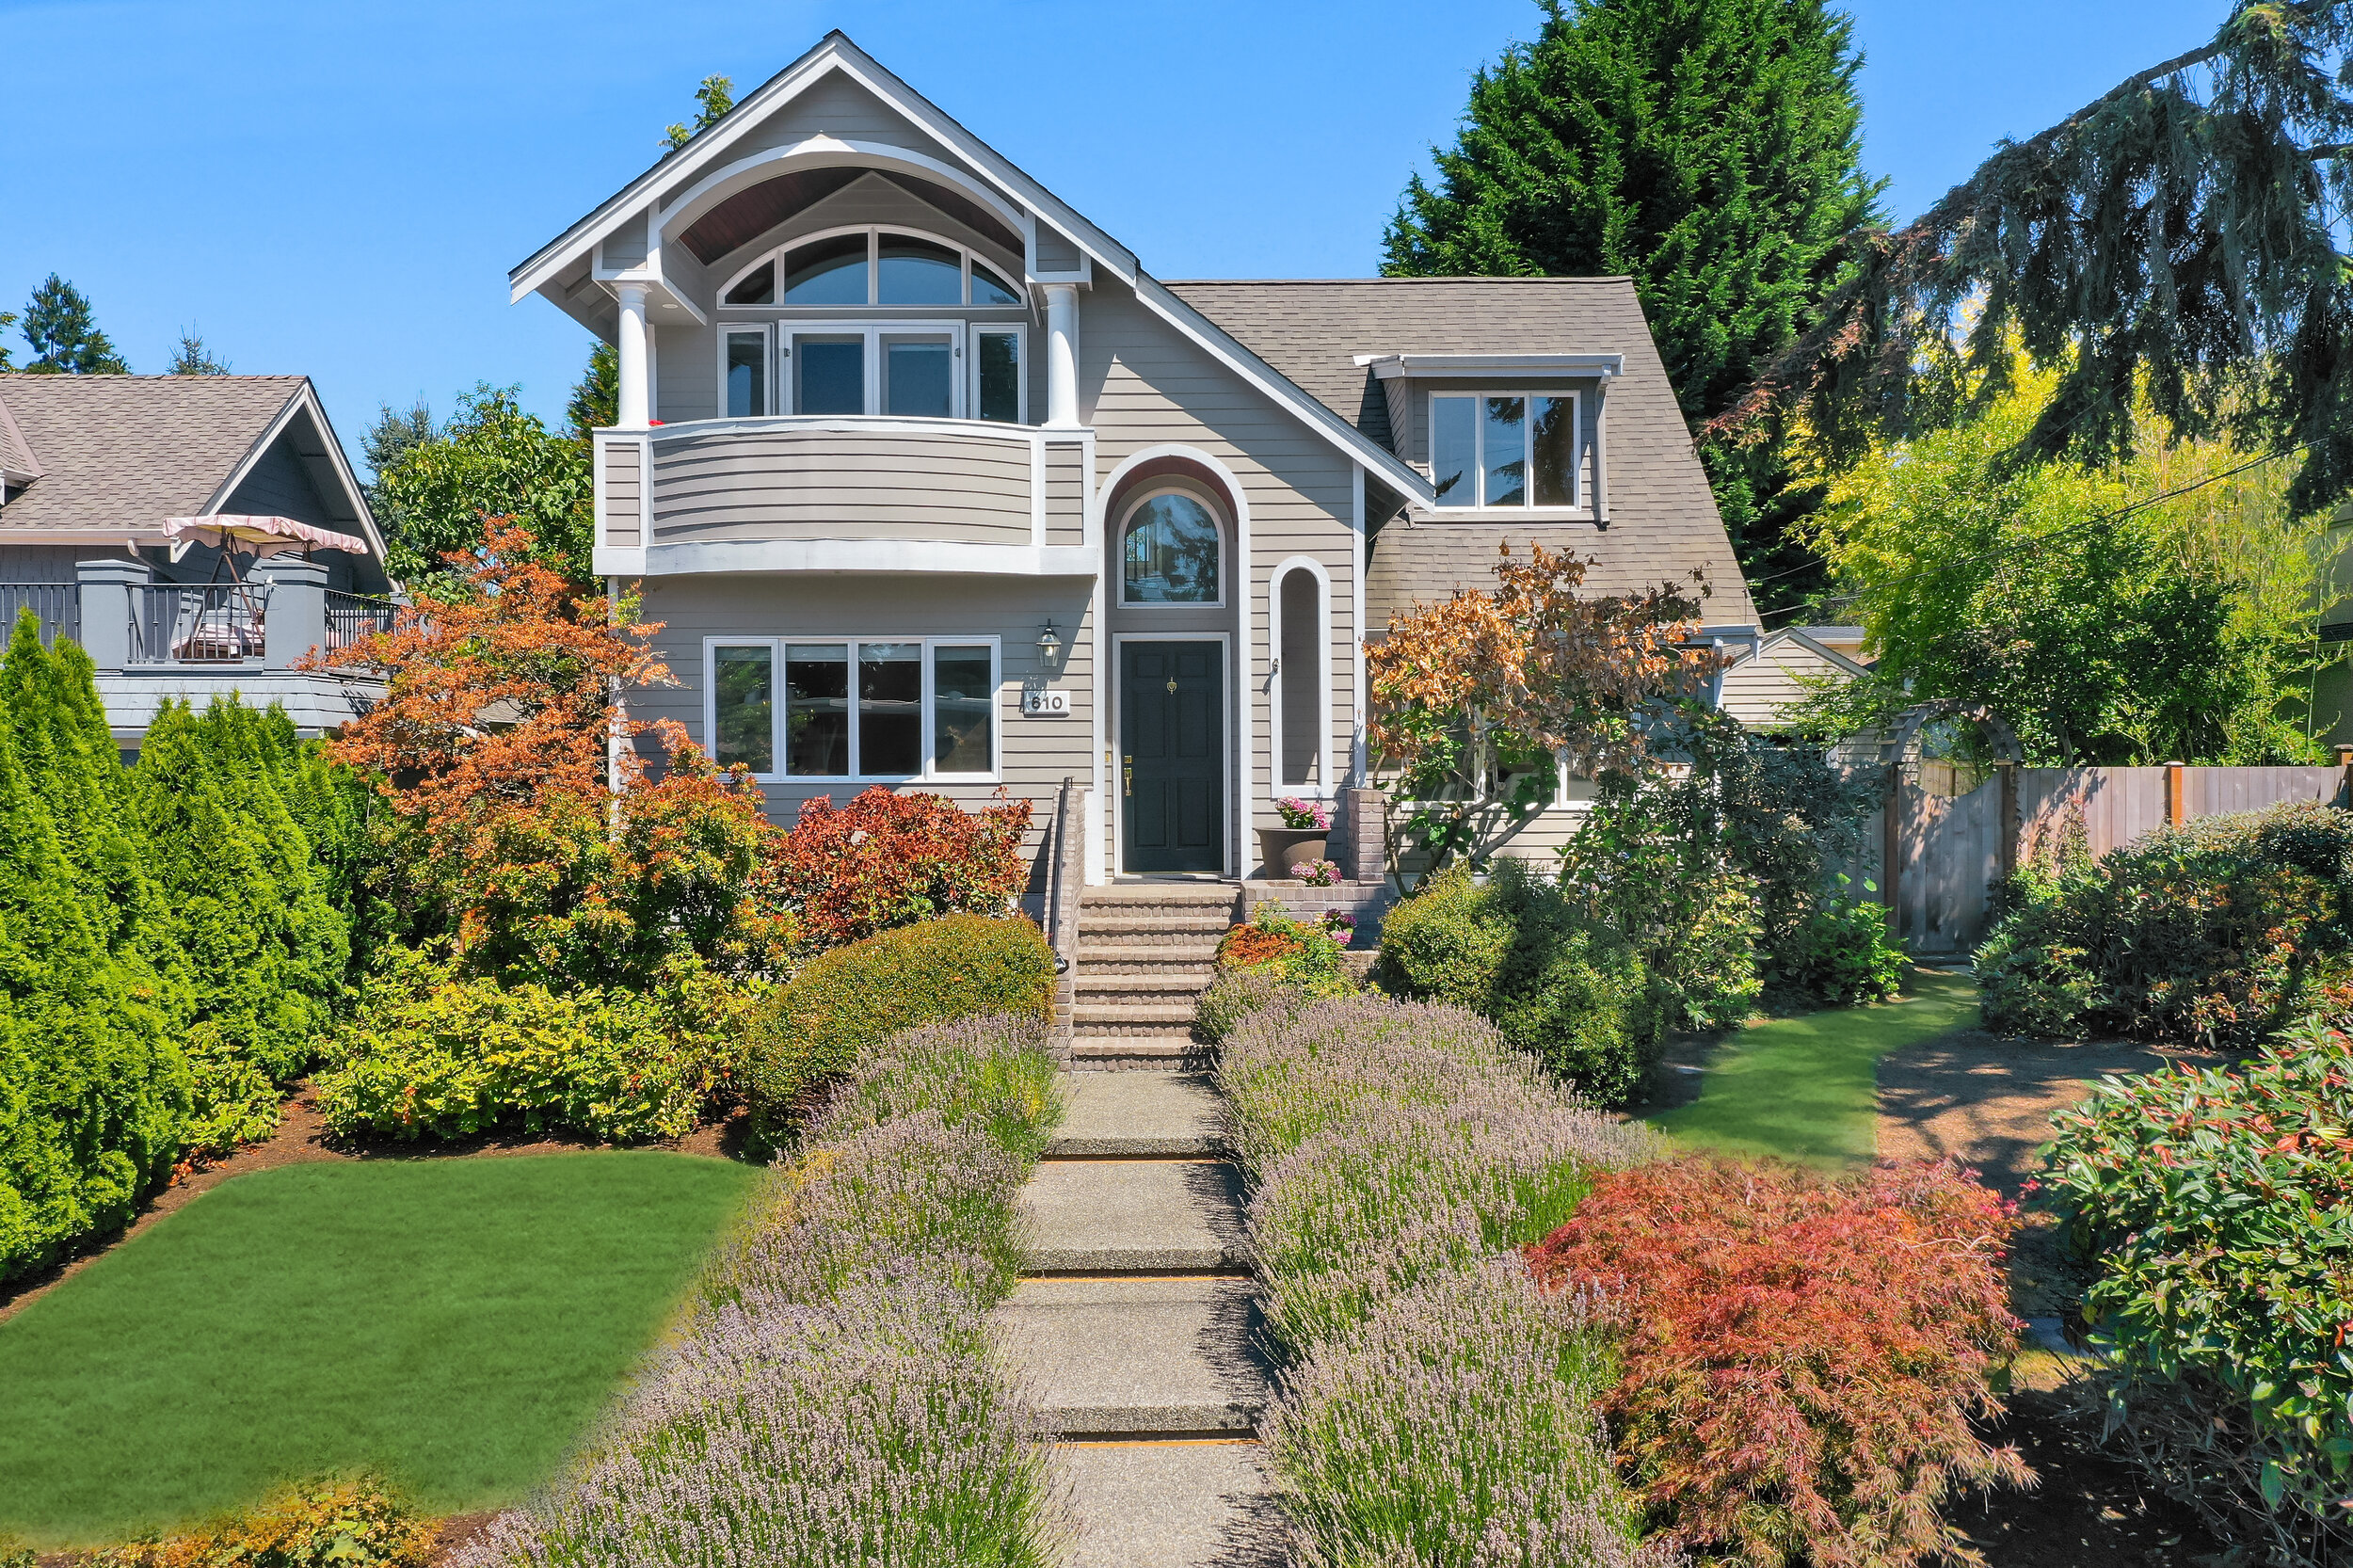 610 13th Ave W, Kirkland | Sold for $2,300,000 | Buyer Represented